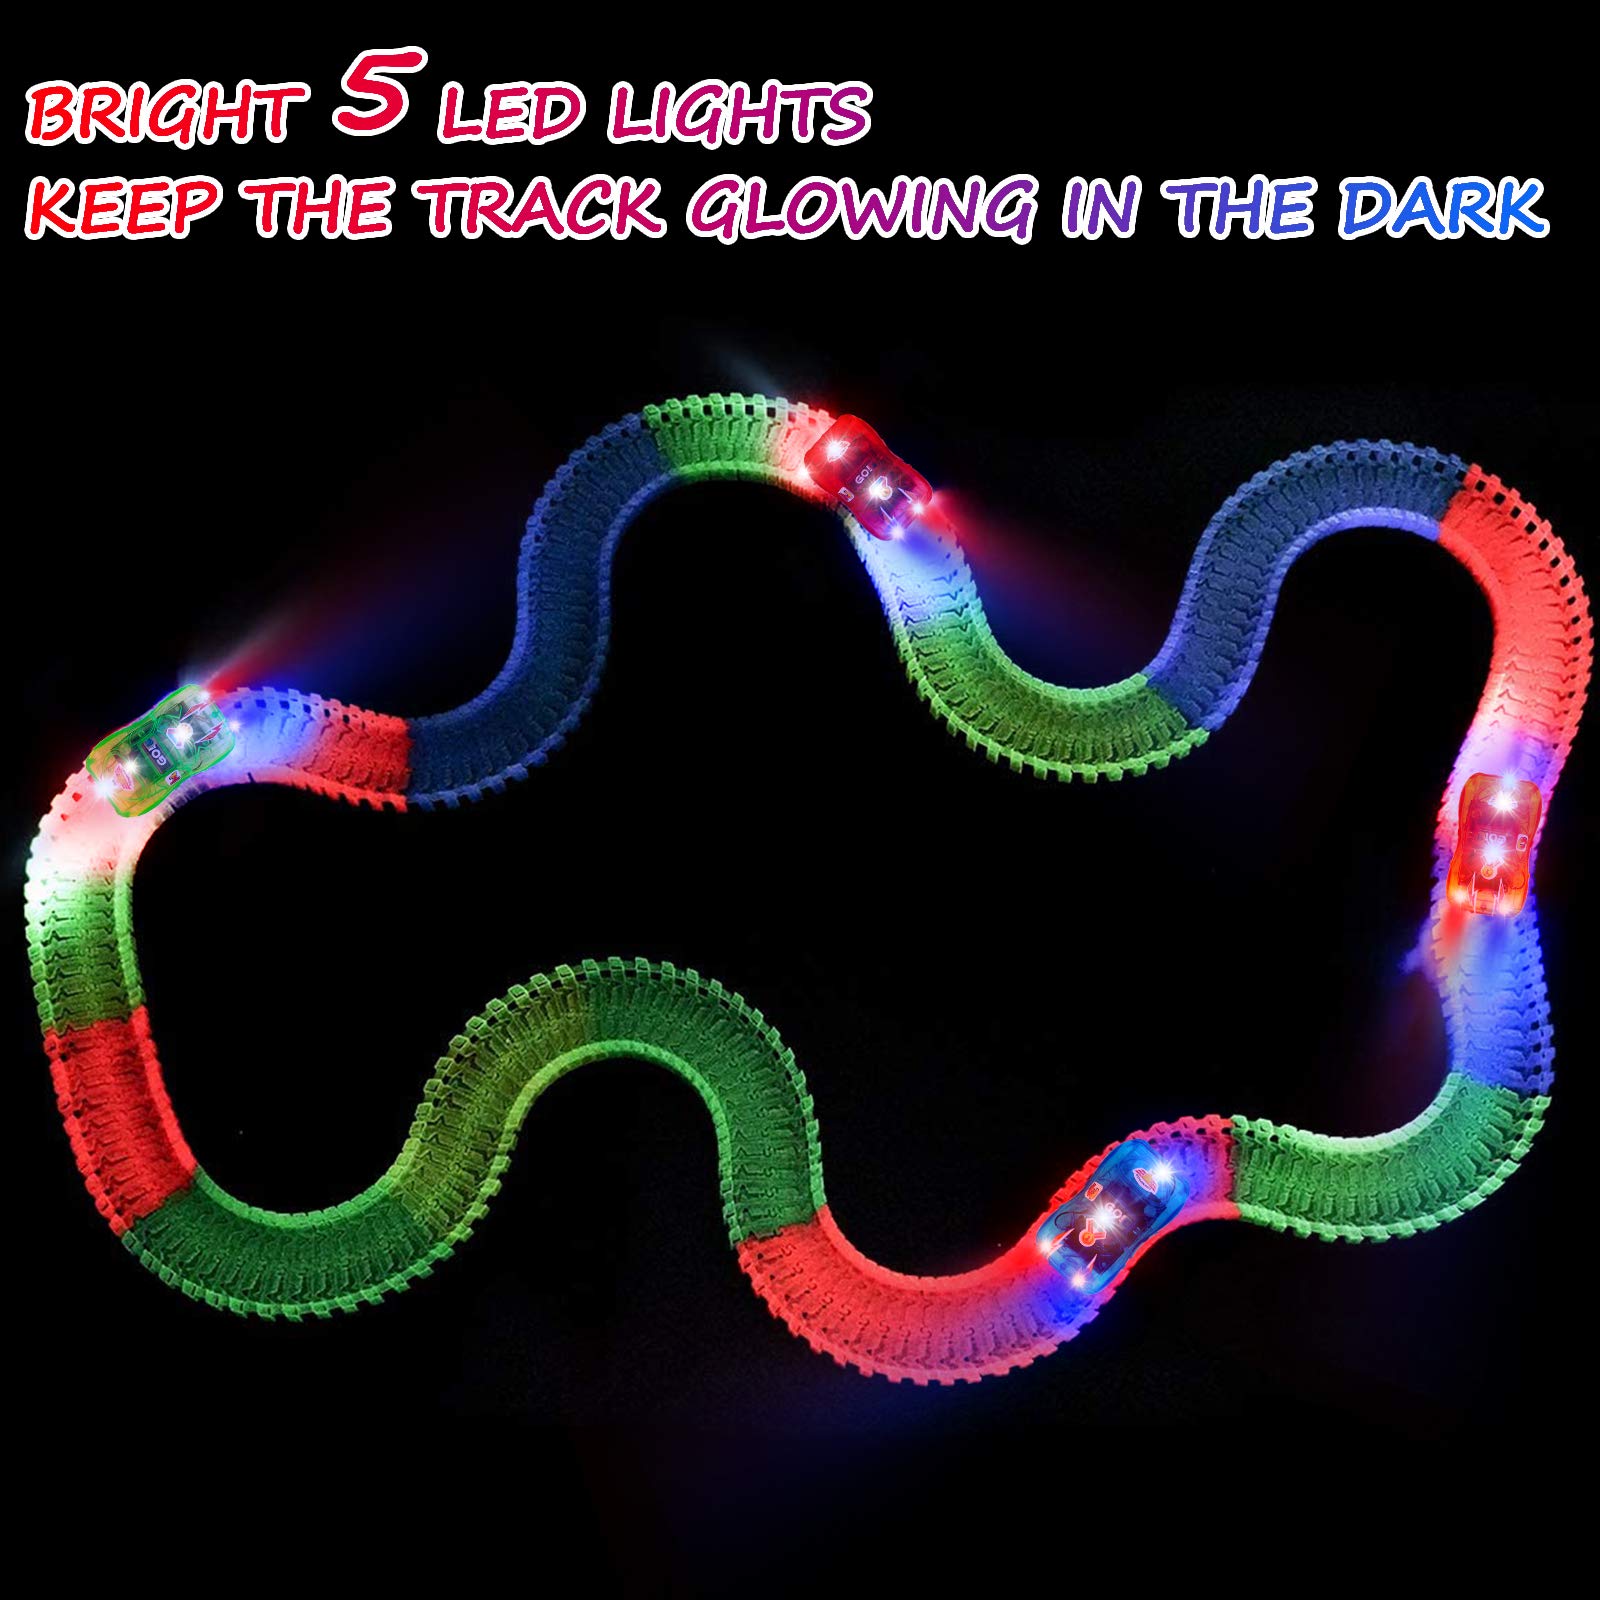 4pcs Tracks Cars Replacement Only - Light Up Magic Cars for Tracks Compatible with Glow in the Dark Toy Cars with 5 Led Flashing Lights for Most Race Tracks, Toys for 3+ Years Old Childs Boy and Girls